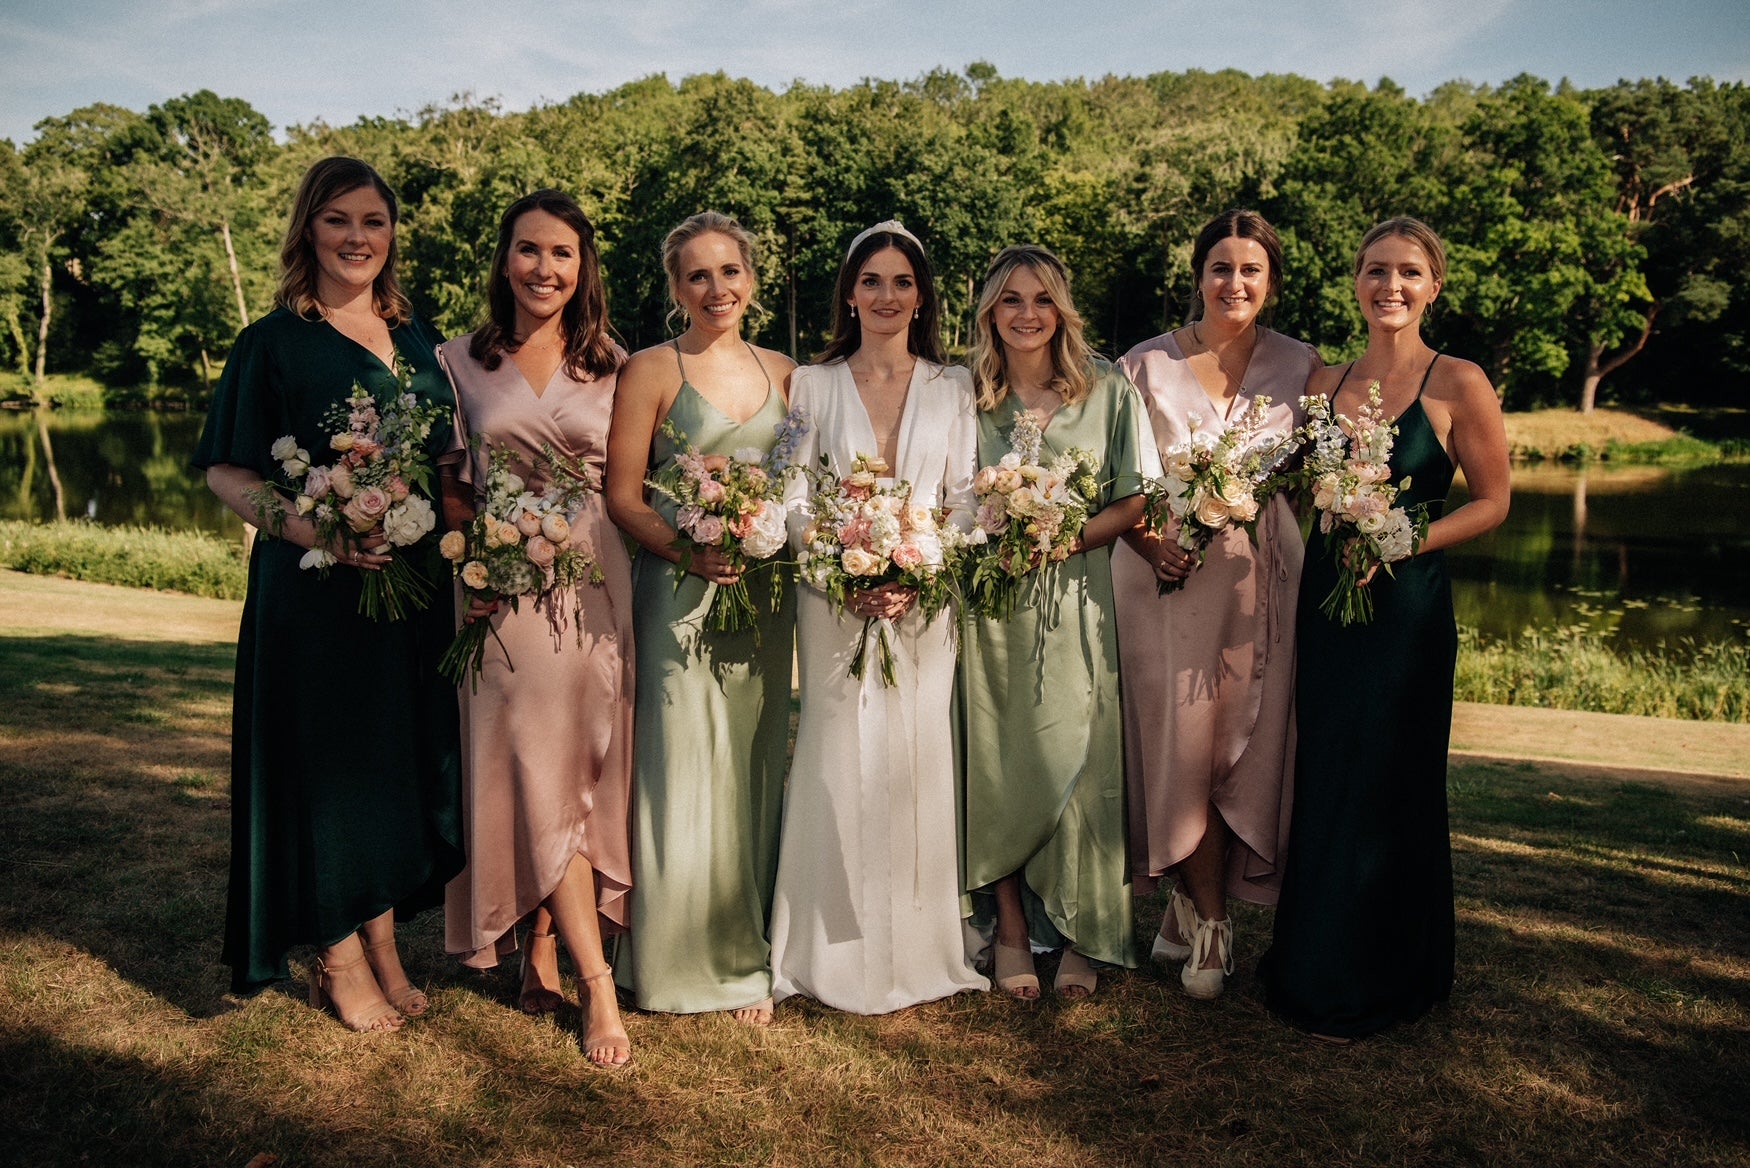 A bridal party of girls which includes a bride and 5 bridesmaids in pink and green bridesmaids dresses